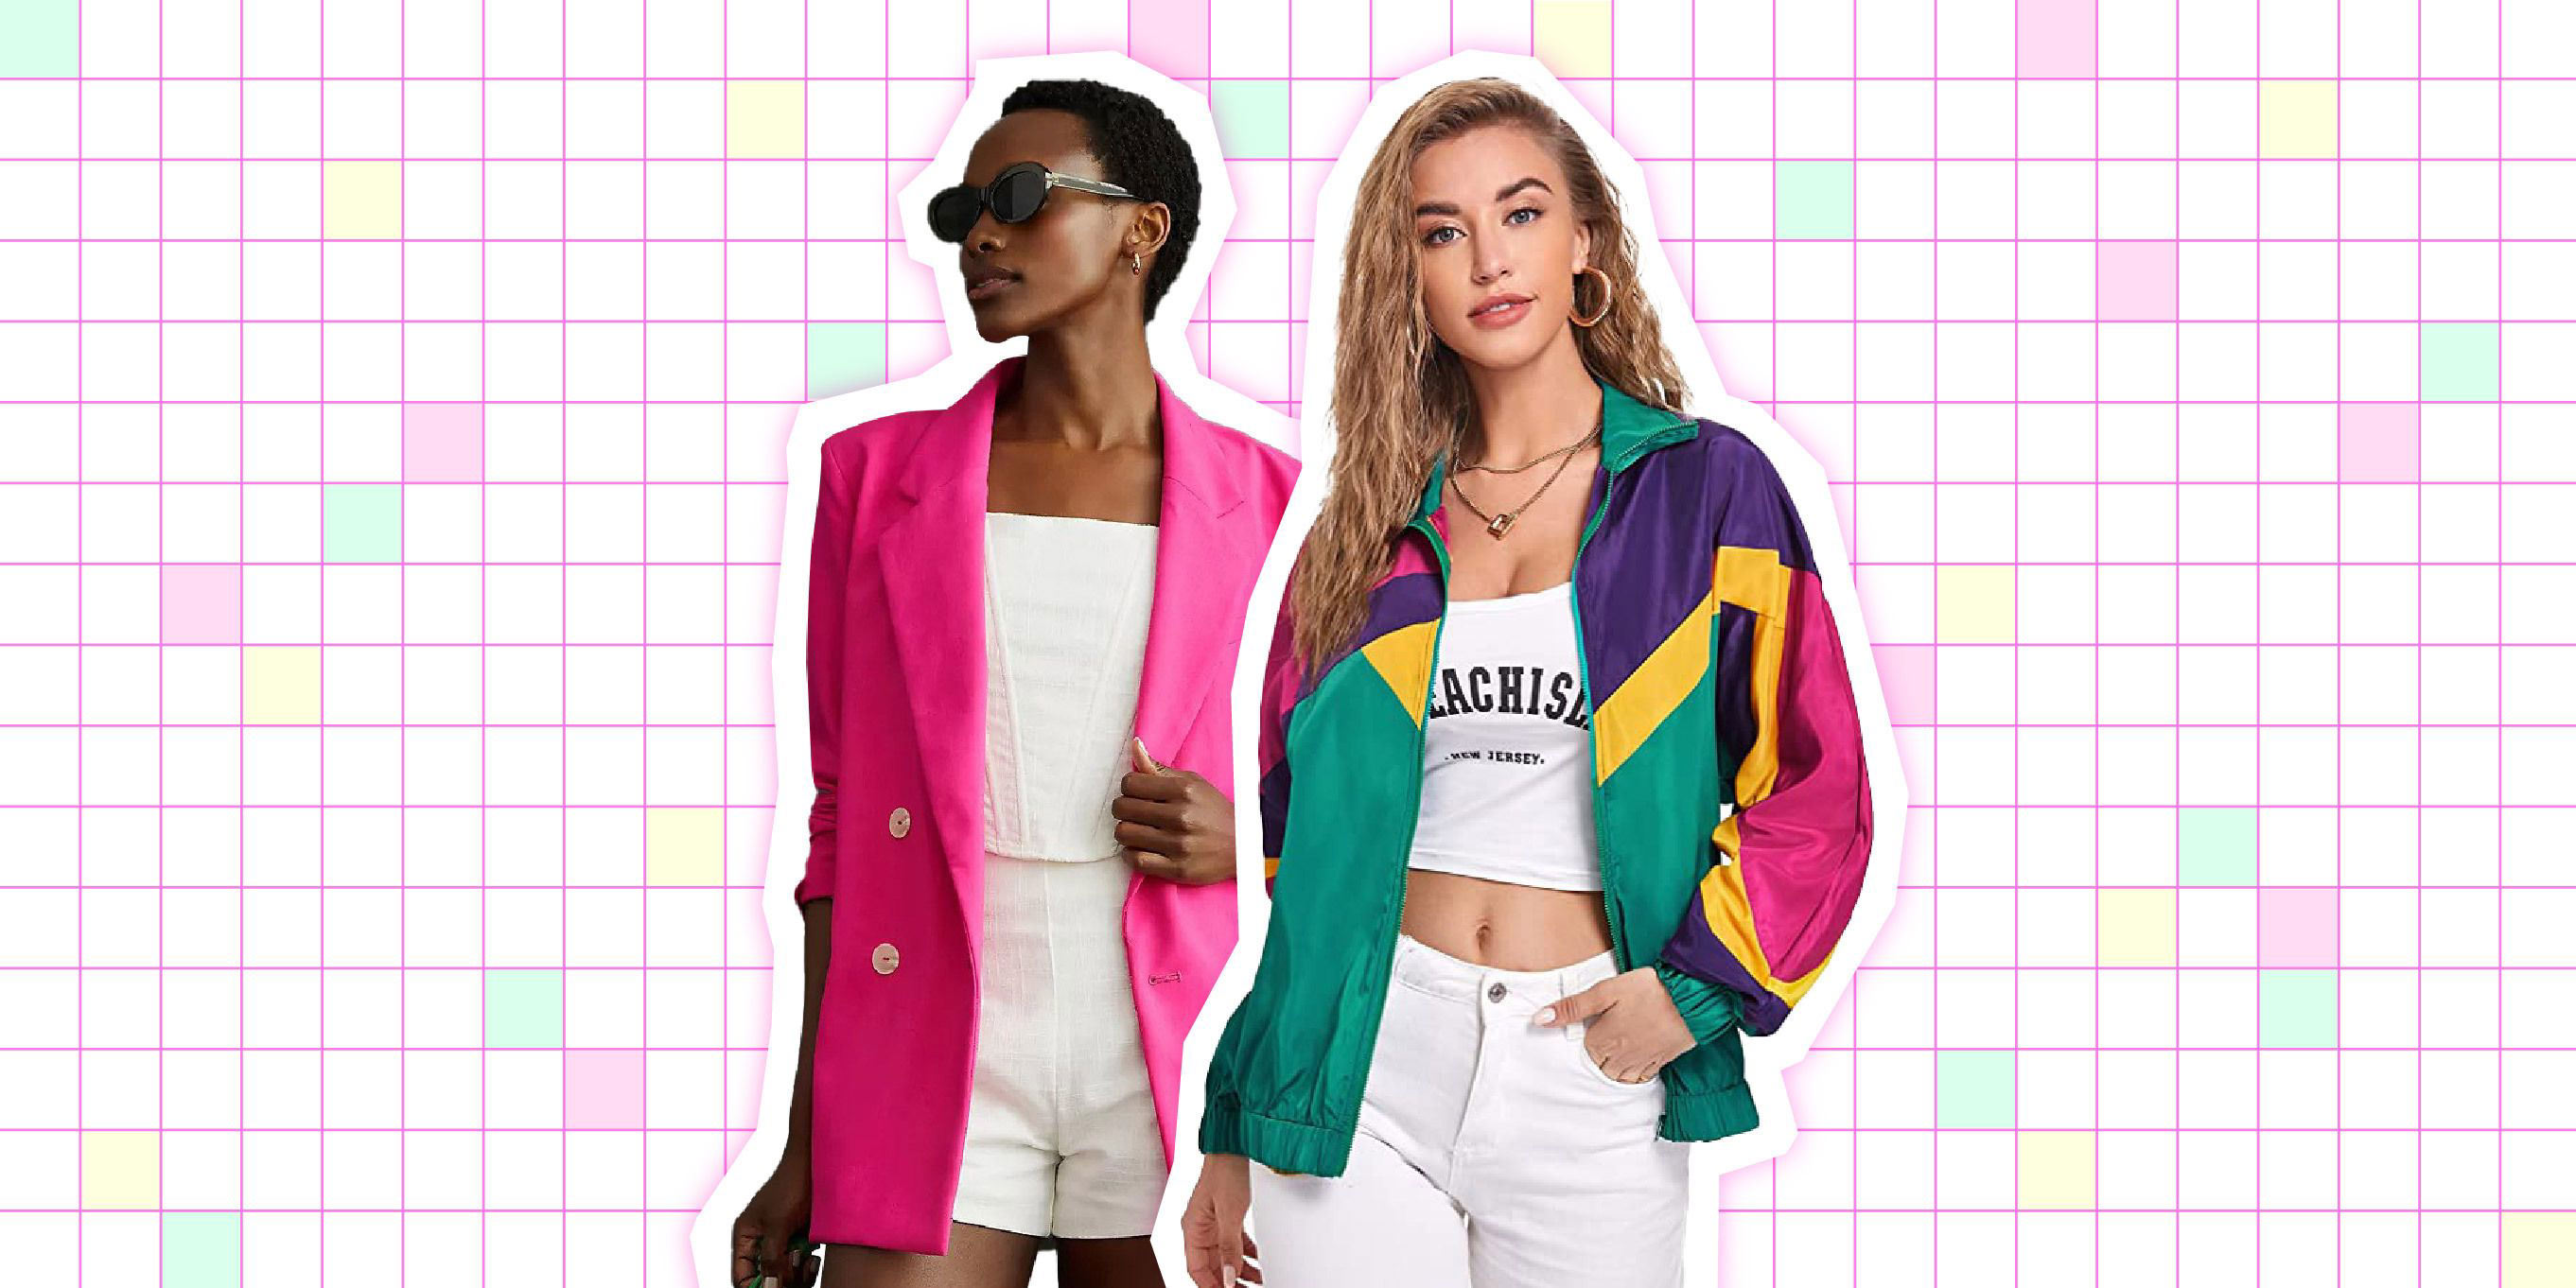 These 20 Vibey '80s-Inspired Outfits Are Trending Hard